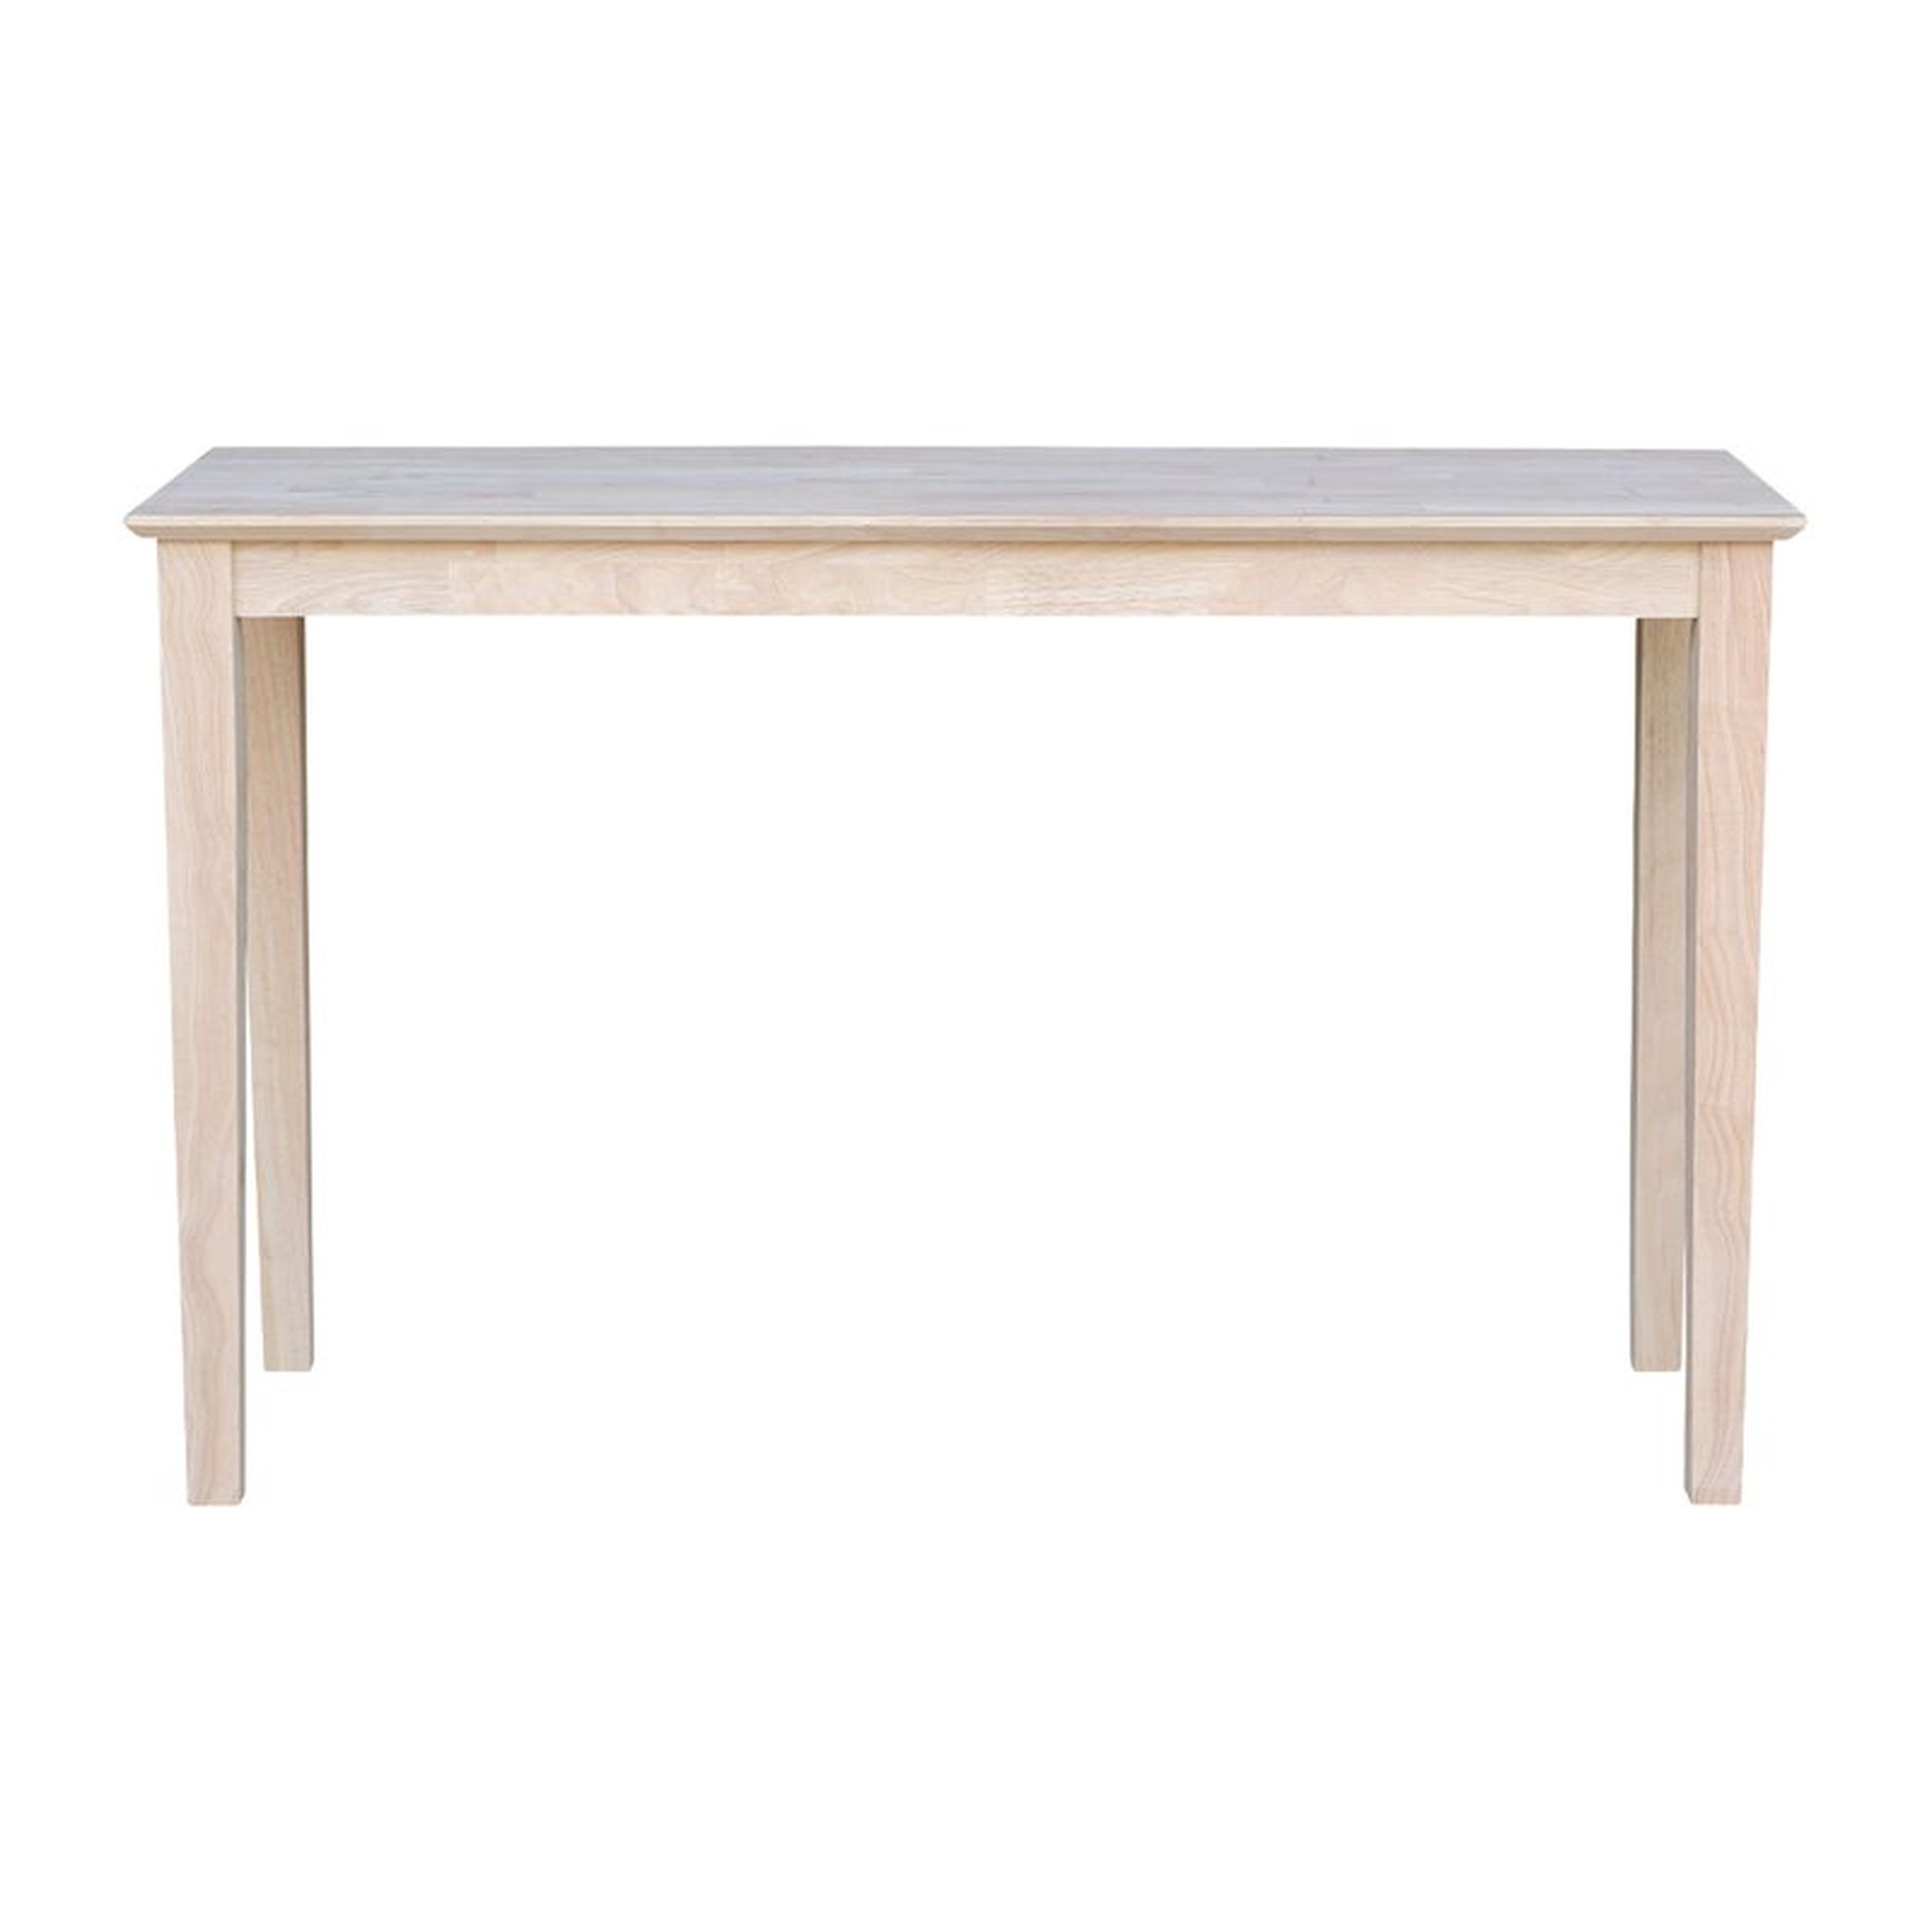 30" H x 60" W x 16" D Unfinished Kaiser Console Table - AllModern